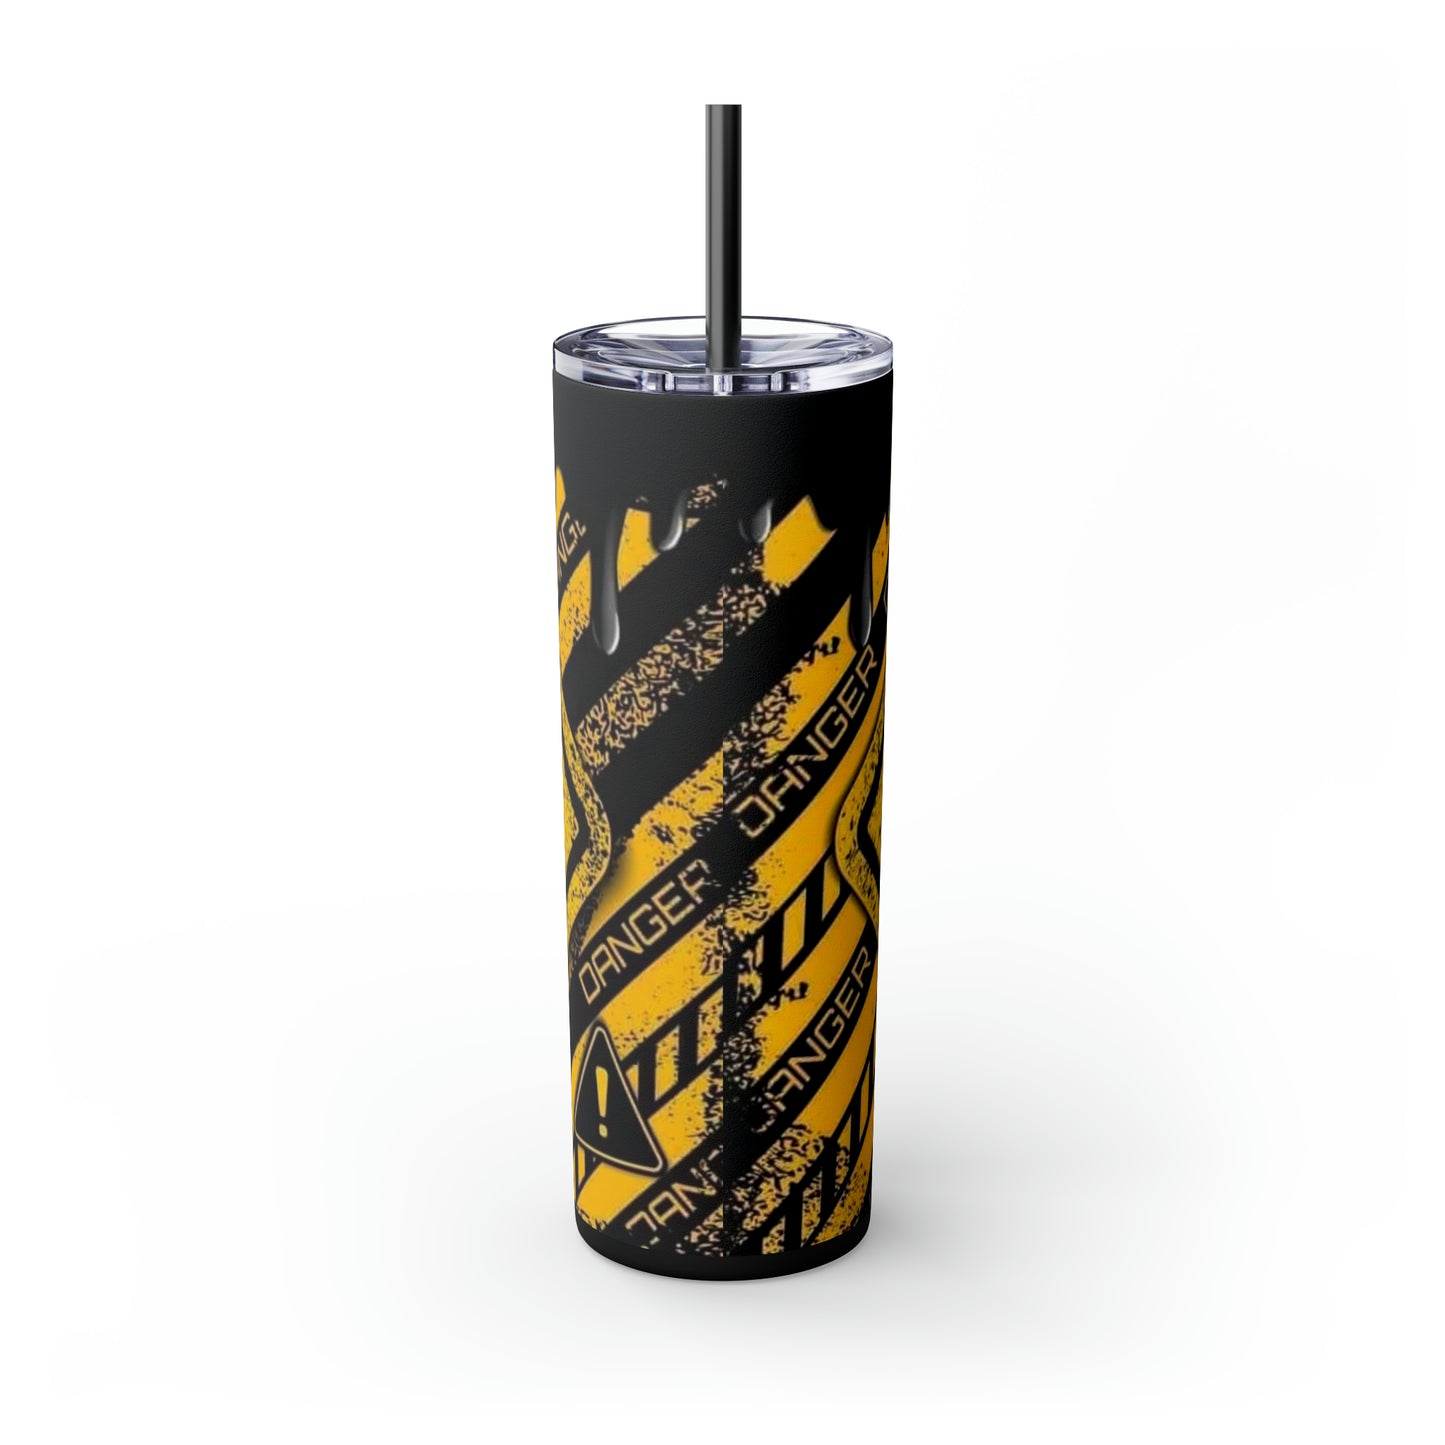 " Caution I Have No Filter" Skinny Tumbler with Straw, 20oz